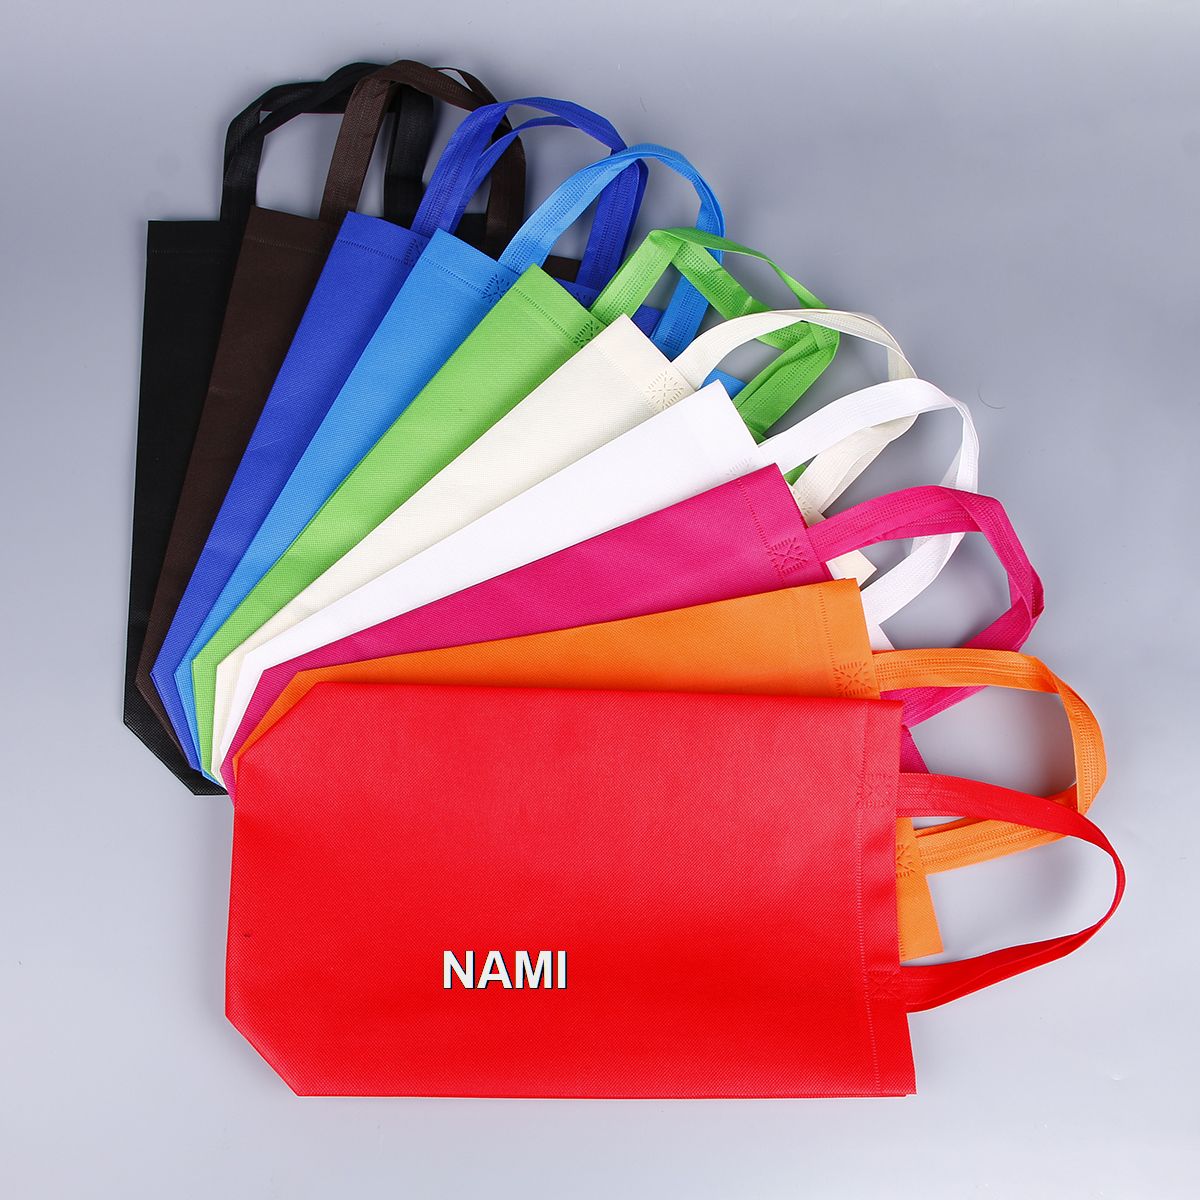  General specifications non-woven stereo bag spot 